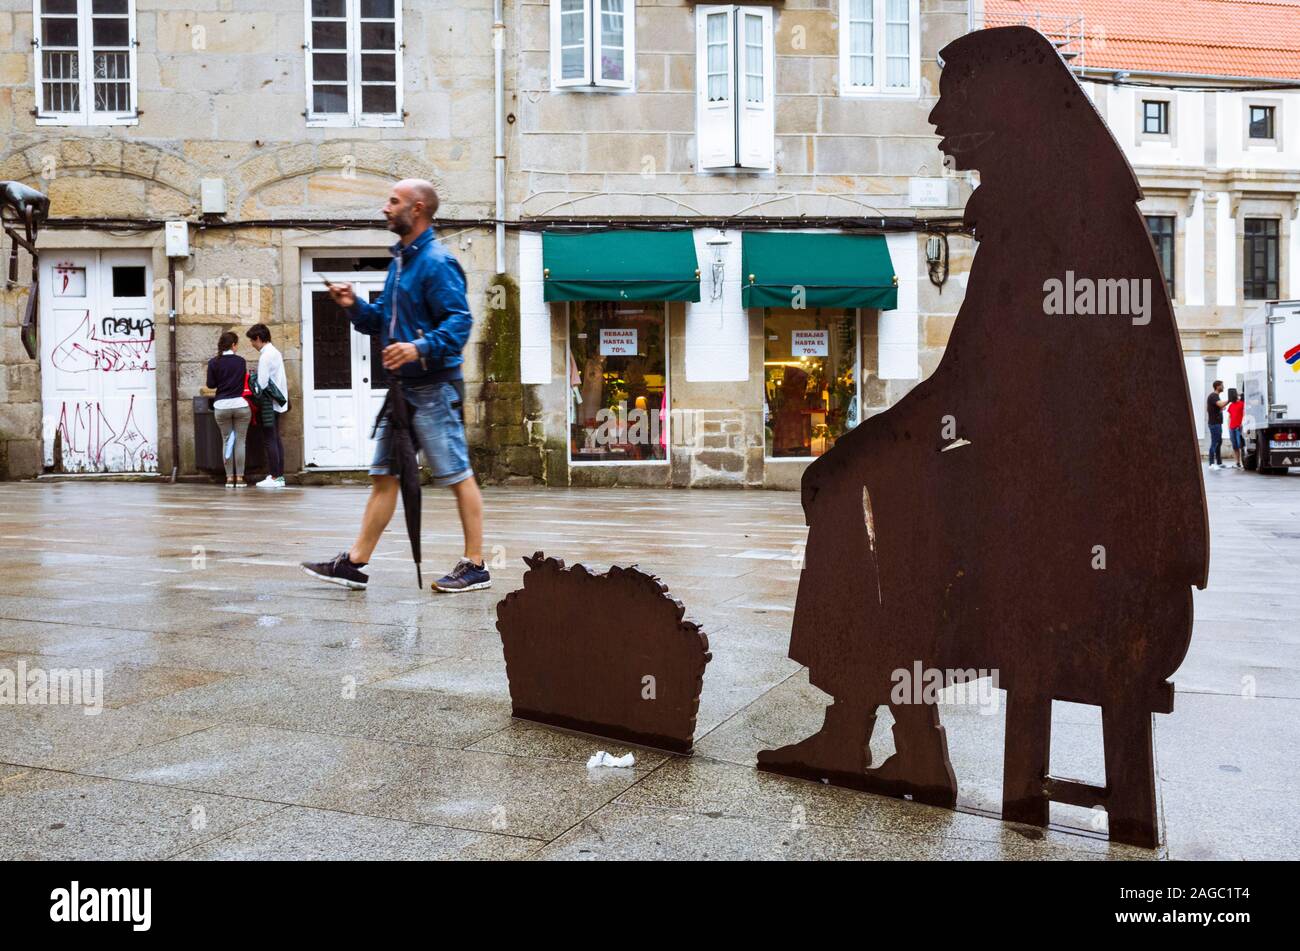 Pontevedra, Galicia, Spain : A man walk past the The Fiel Contraste sculpture by artist Ramón Conde inaugurated in 2010 at Alhondiga street in the old Stock Photo